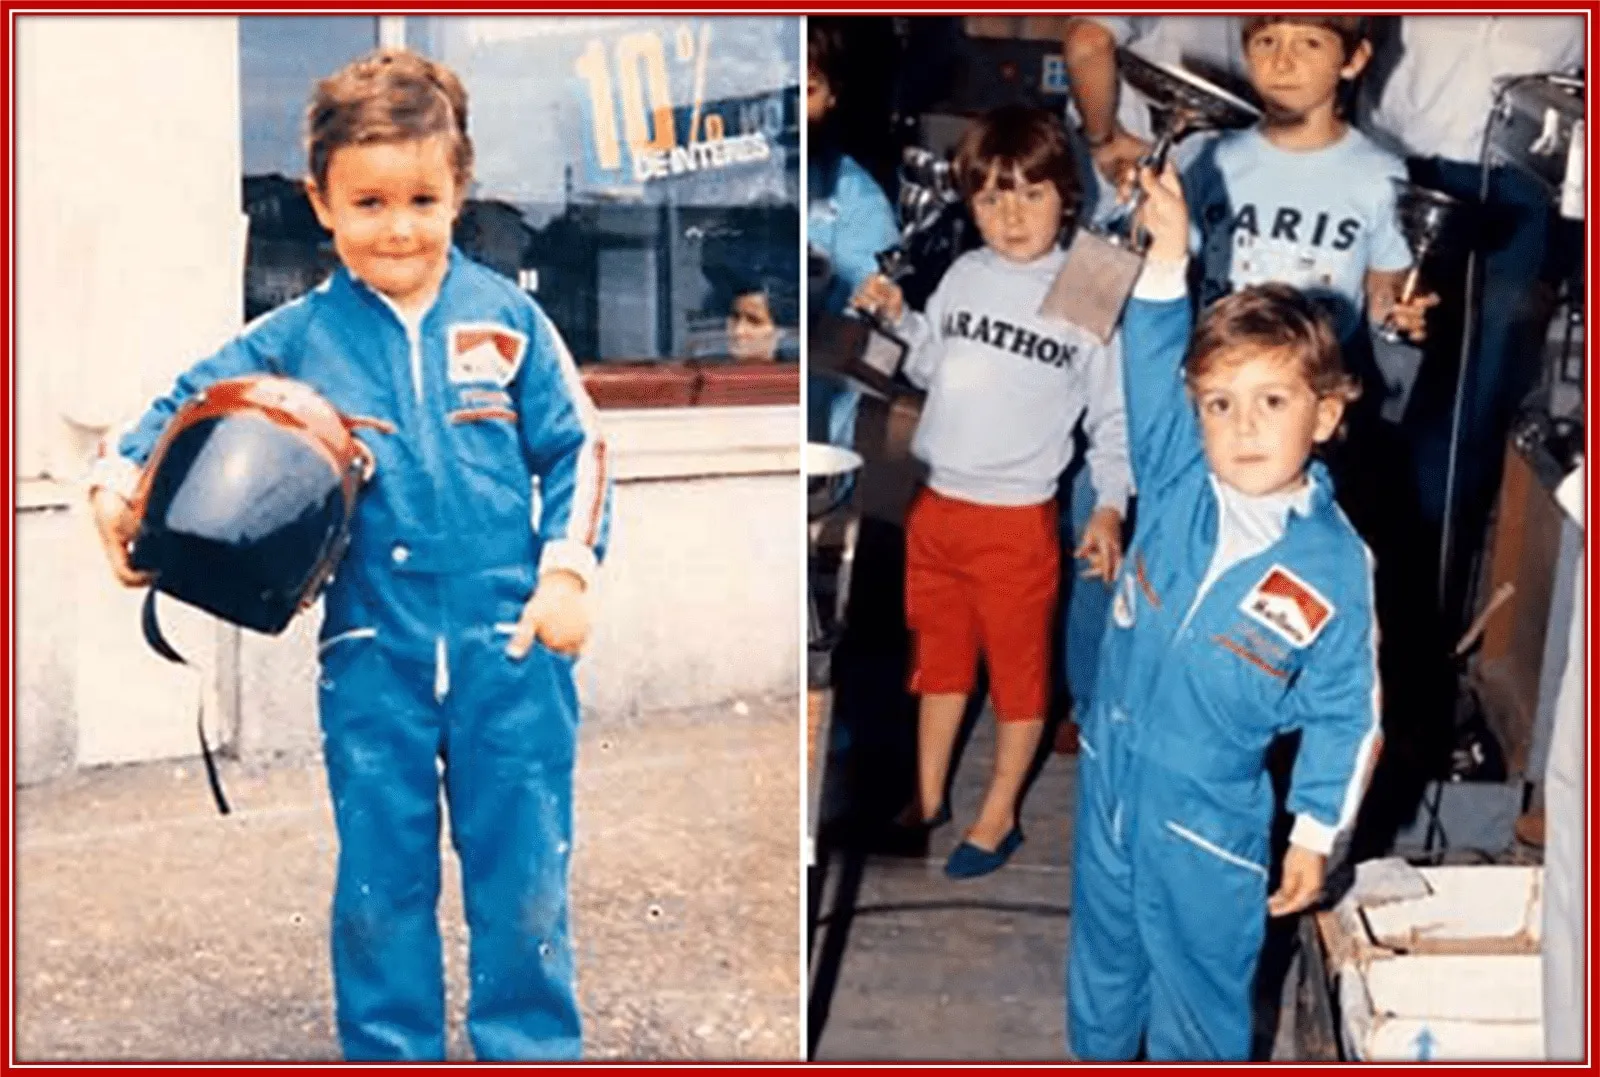 After his seventh birthday, Fernando Alonso entered his first proper kart race.